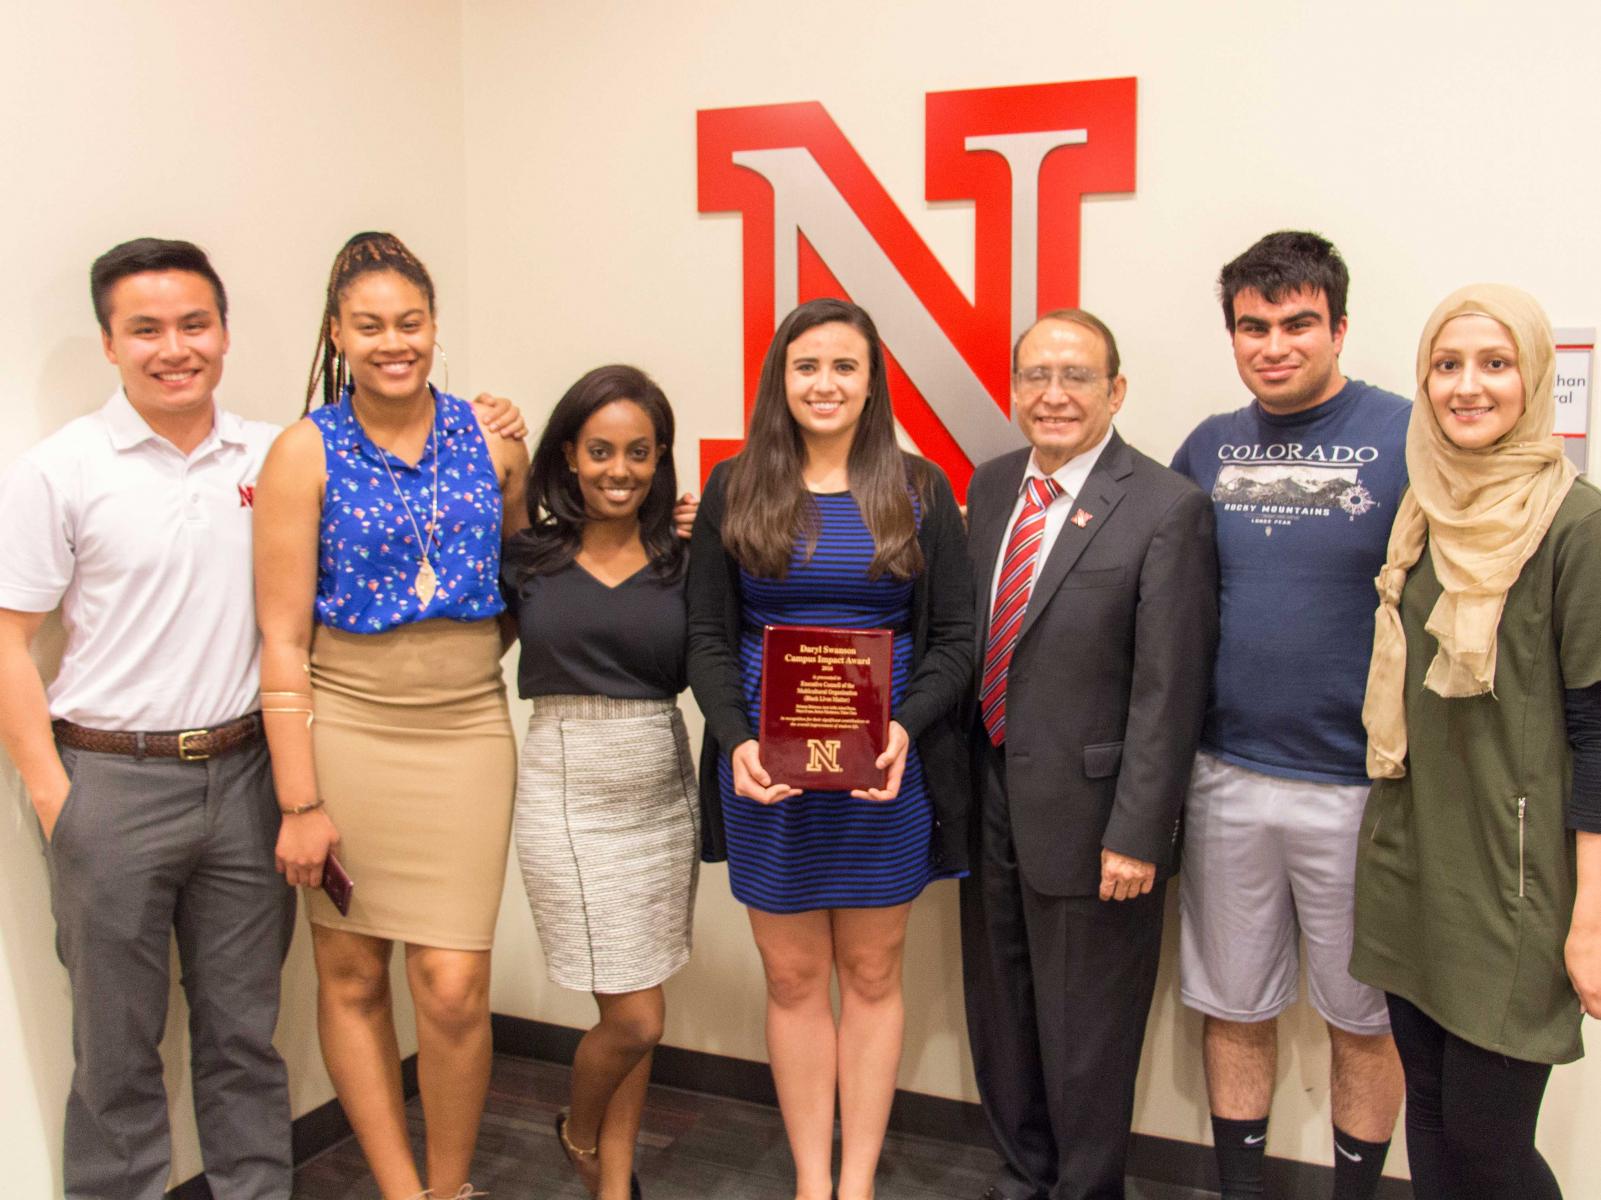 2016 Daryl Swanson Campus Impact Award recipients, members of the Executive Council of Multicultural Organizations at UNL